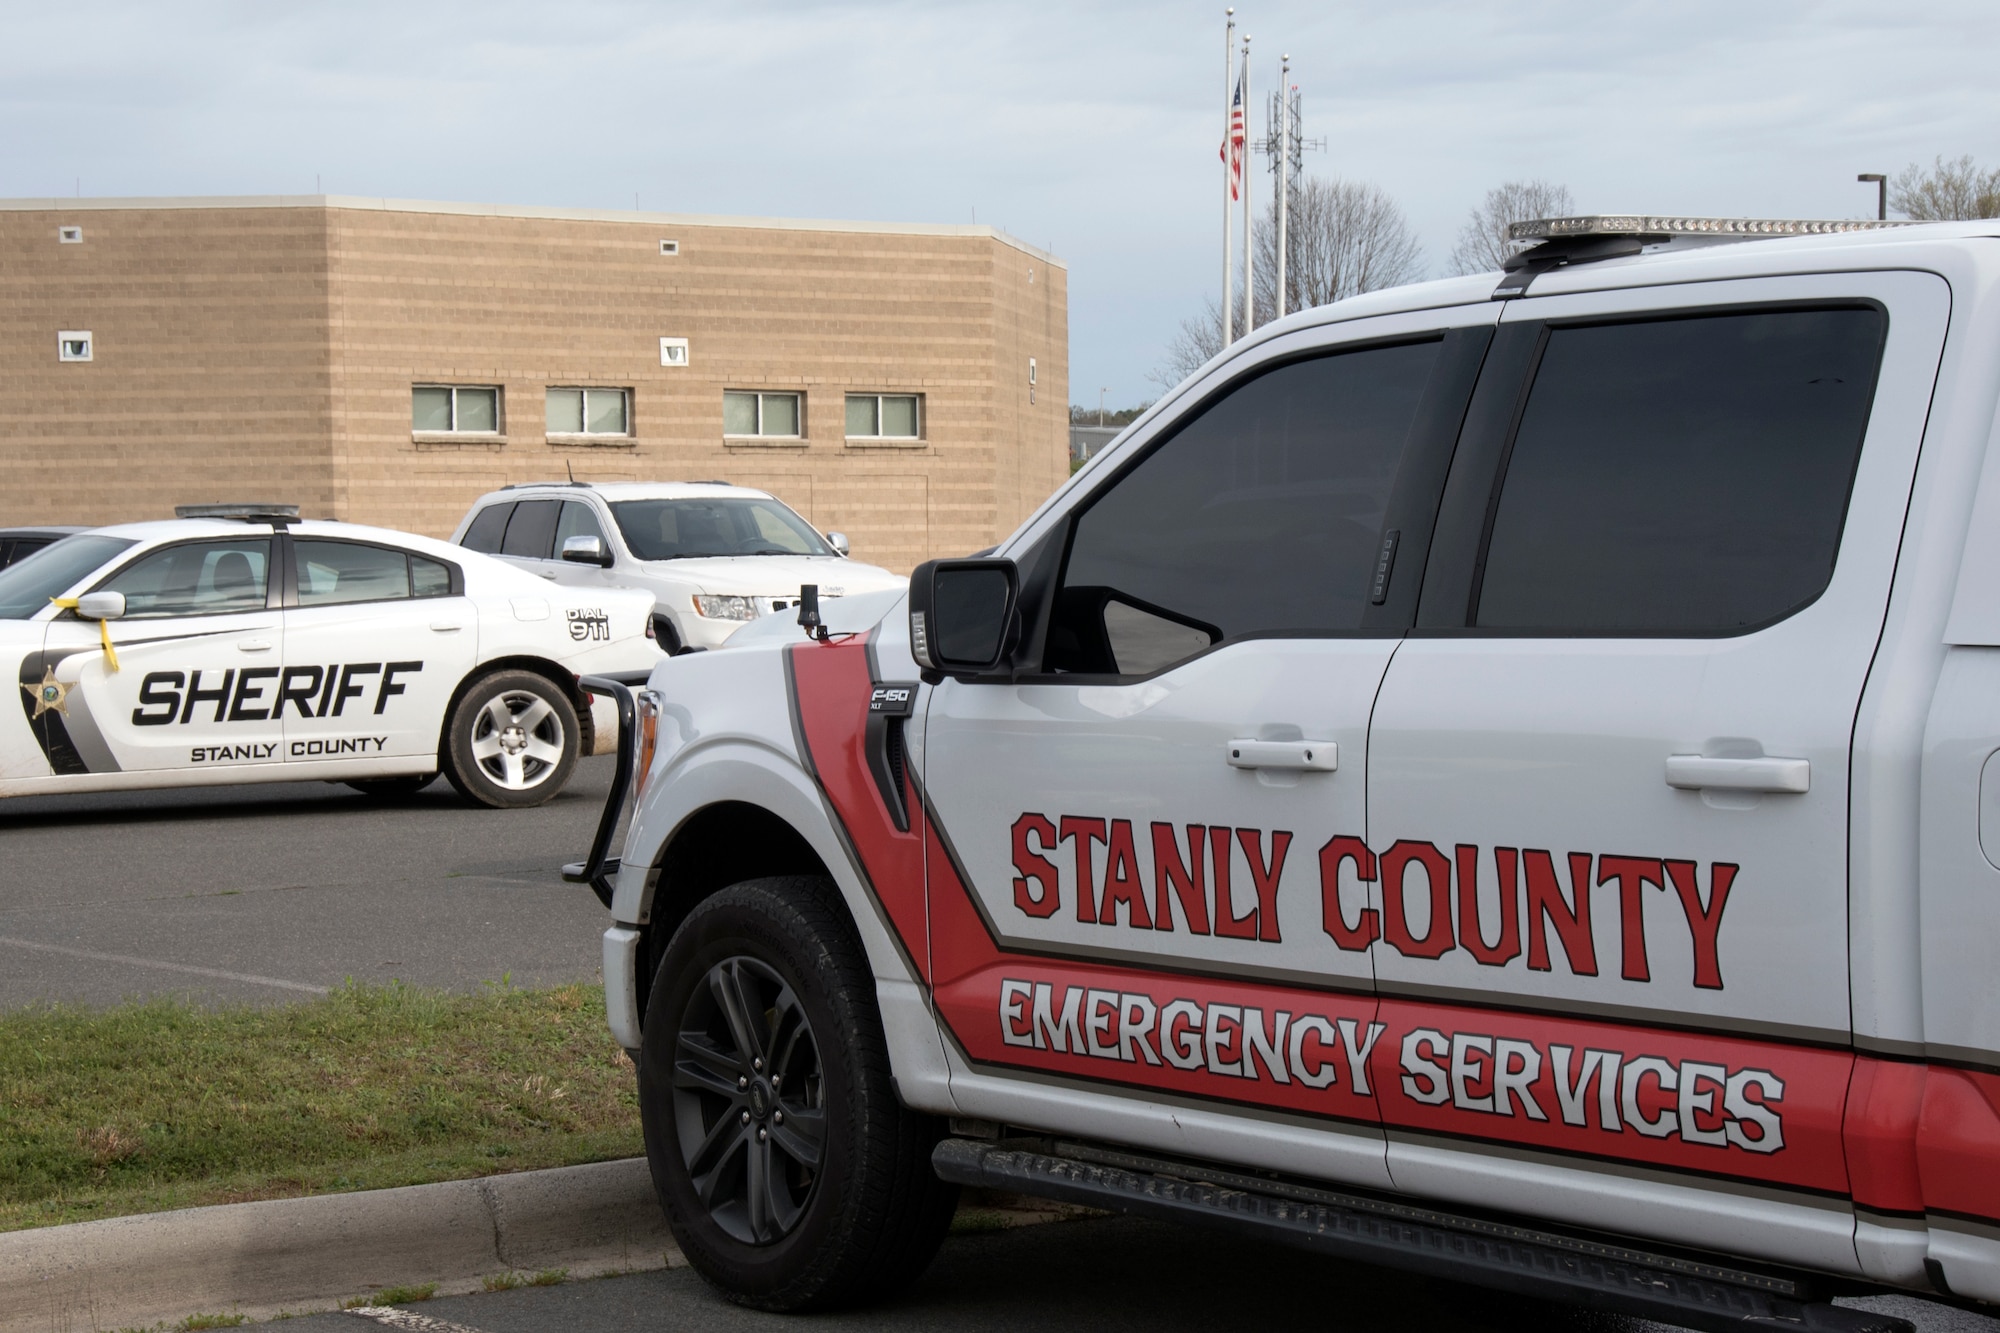 Stanly County Sheriff and Emergency Services vehicles staged during an active-shooter training.